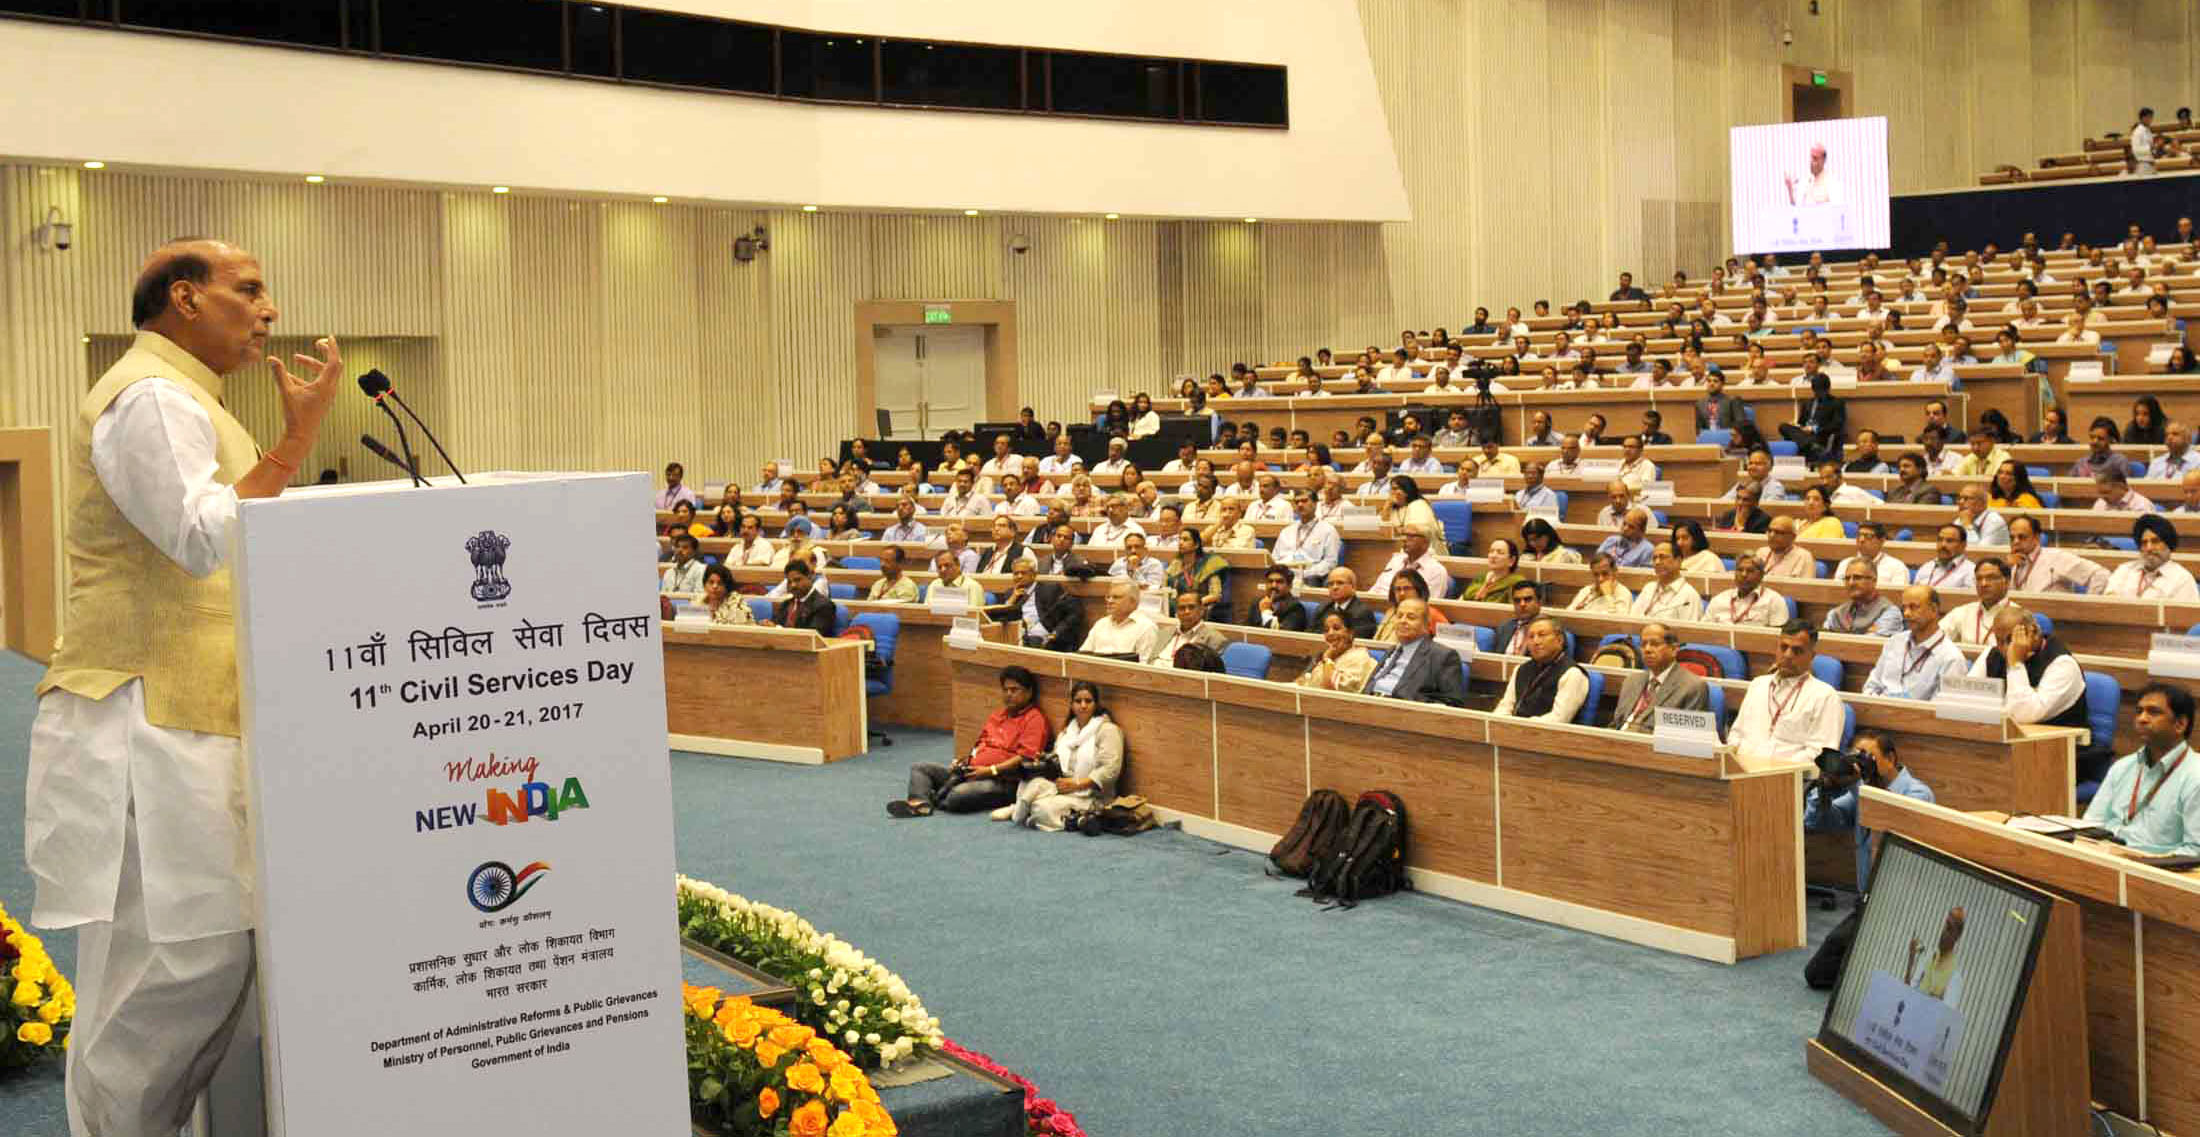 The Union Home Minister, Shri Rajnath Singh addressing at the inauguration of the 11th Civil Services Day 2017 function, in New Delhi on April 20, 2017. 	The Minister of State for Development of North Eastern Region (I/C), Prime Ministers Office, Personnel, Public Grievances & Pensions, Atomic Energy and Space, Dr. Jitendra Singh, the Cabinet Secretary, Shri P.K. Sinha, the Additional Principal Secretary to the Prime Minister, Dr. P.K. Mishra and other dignitaries are also seen.